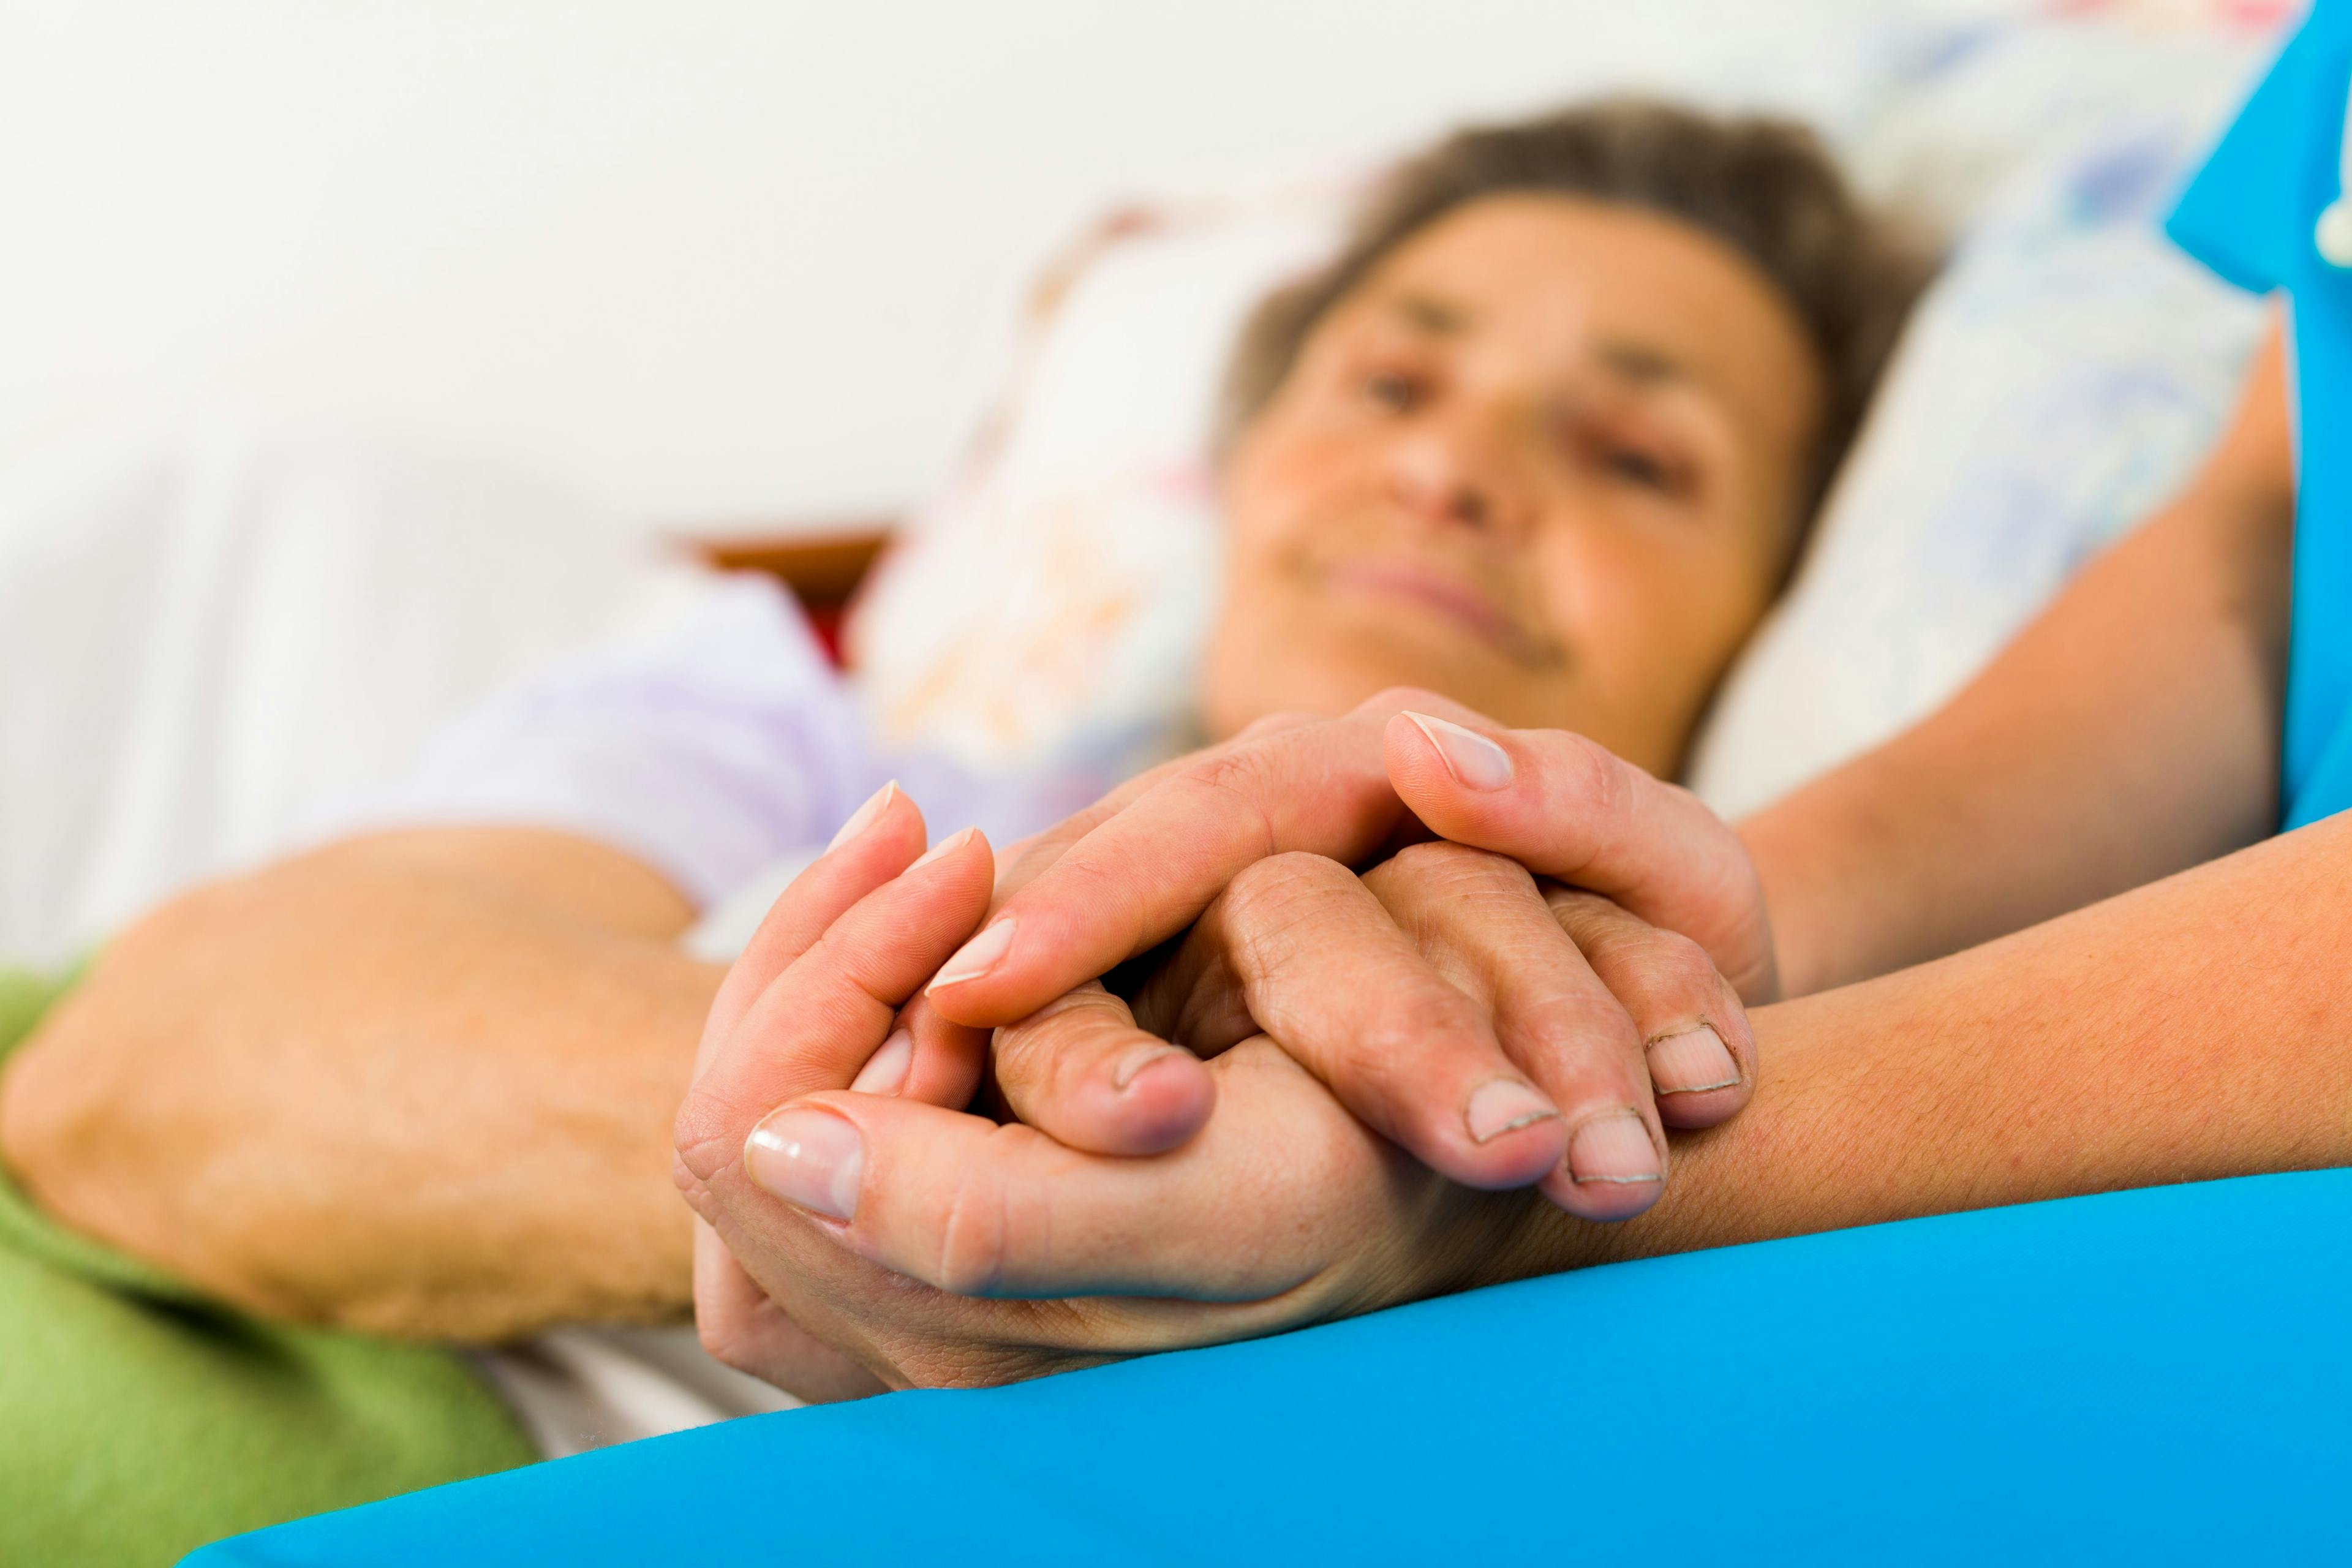 The Complicated Role of Oncology Pharmacist/Caregiver in Managing Patient Care, Treatment